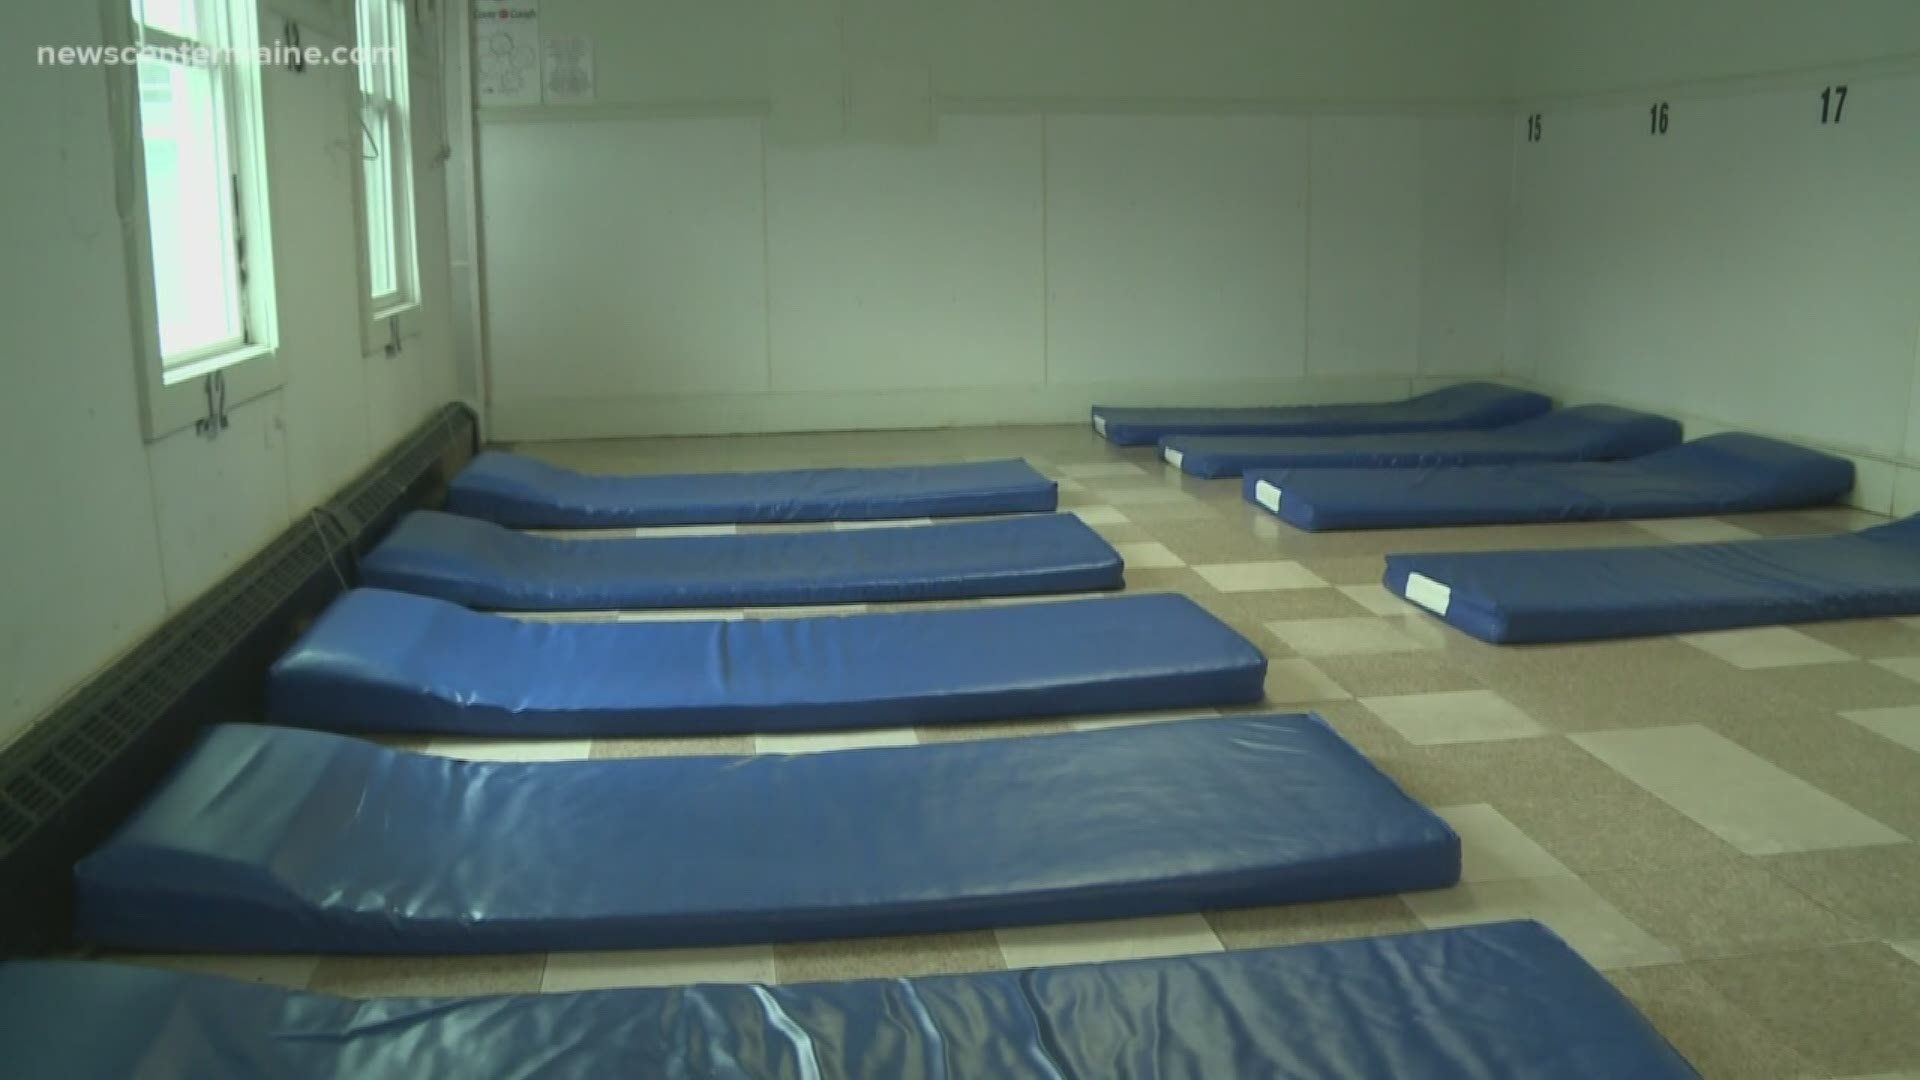 Portland City Council nearing vote on new homeless shelter guidelines